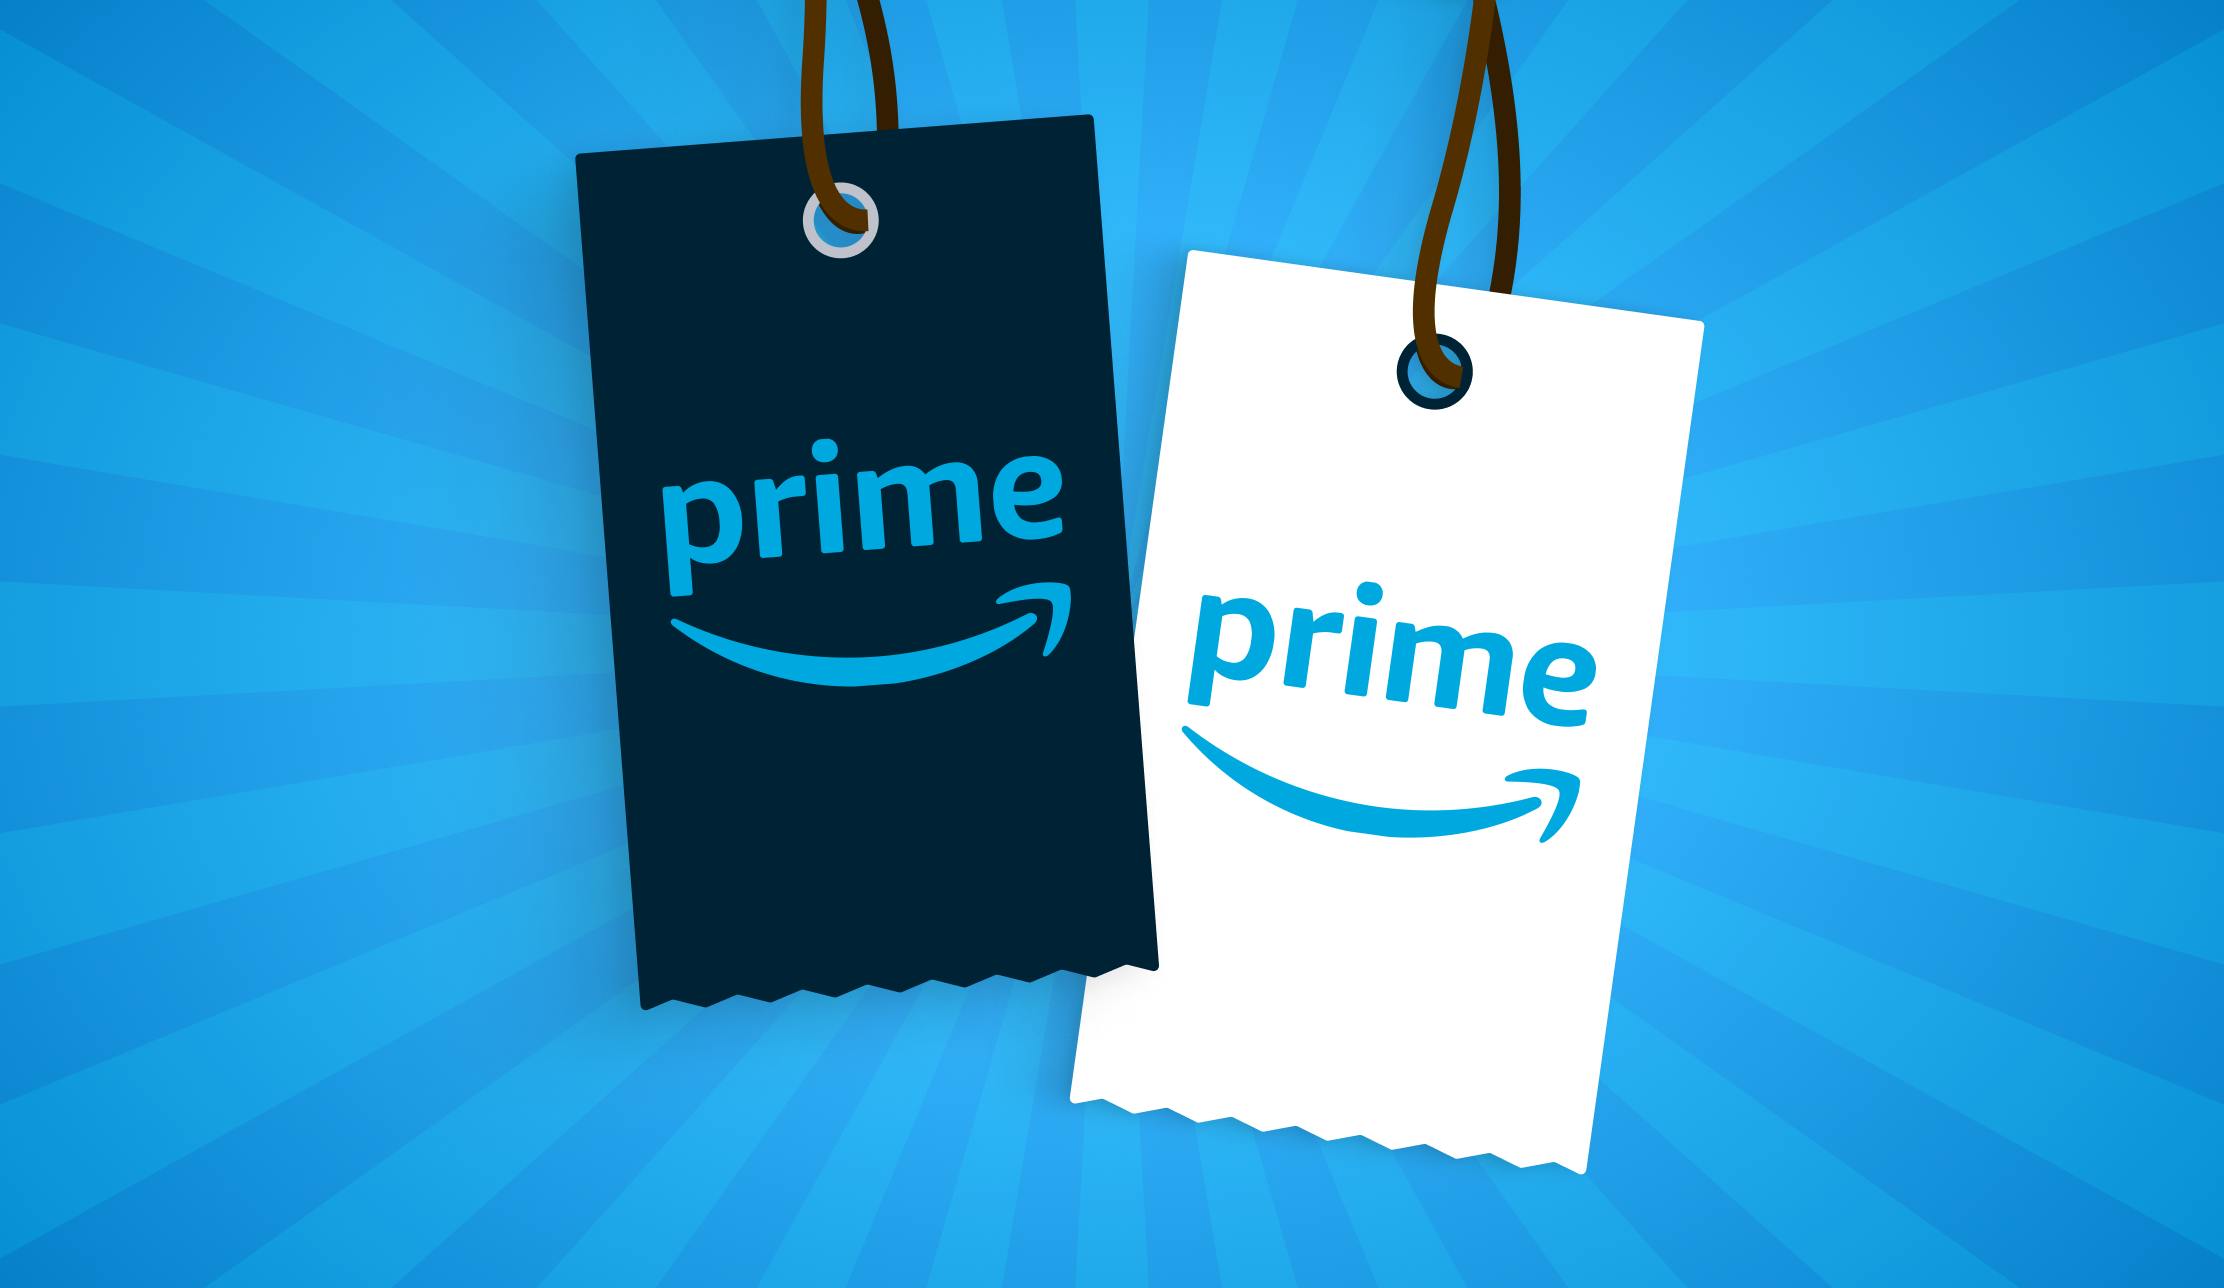 https://images.prismic.io/getcircuit/c5273437-6037-4c11-85b5-1ad5e9372816_How+to+Get+Next+Day+Delivery+on+Amazon_+%5Bn%5D+Easy+Ways+%28Without+Prime%29.png?auto=compress,format